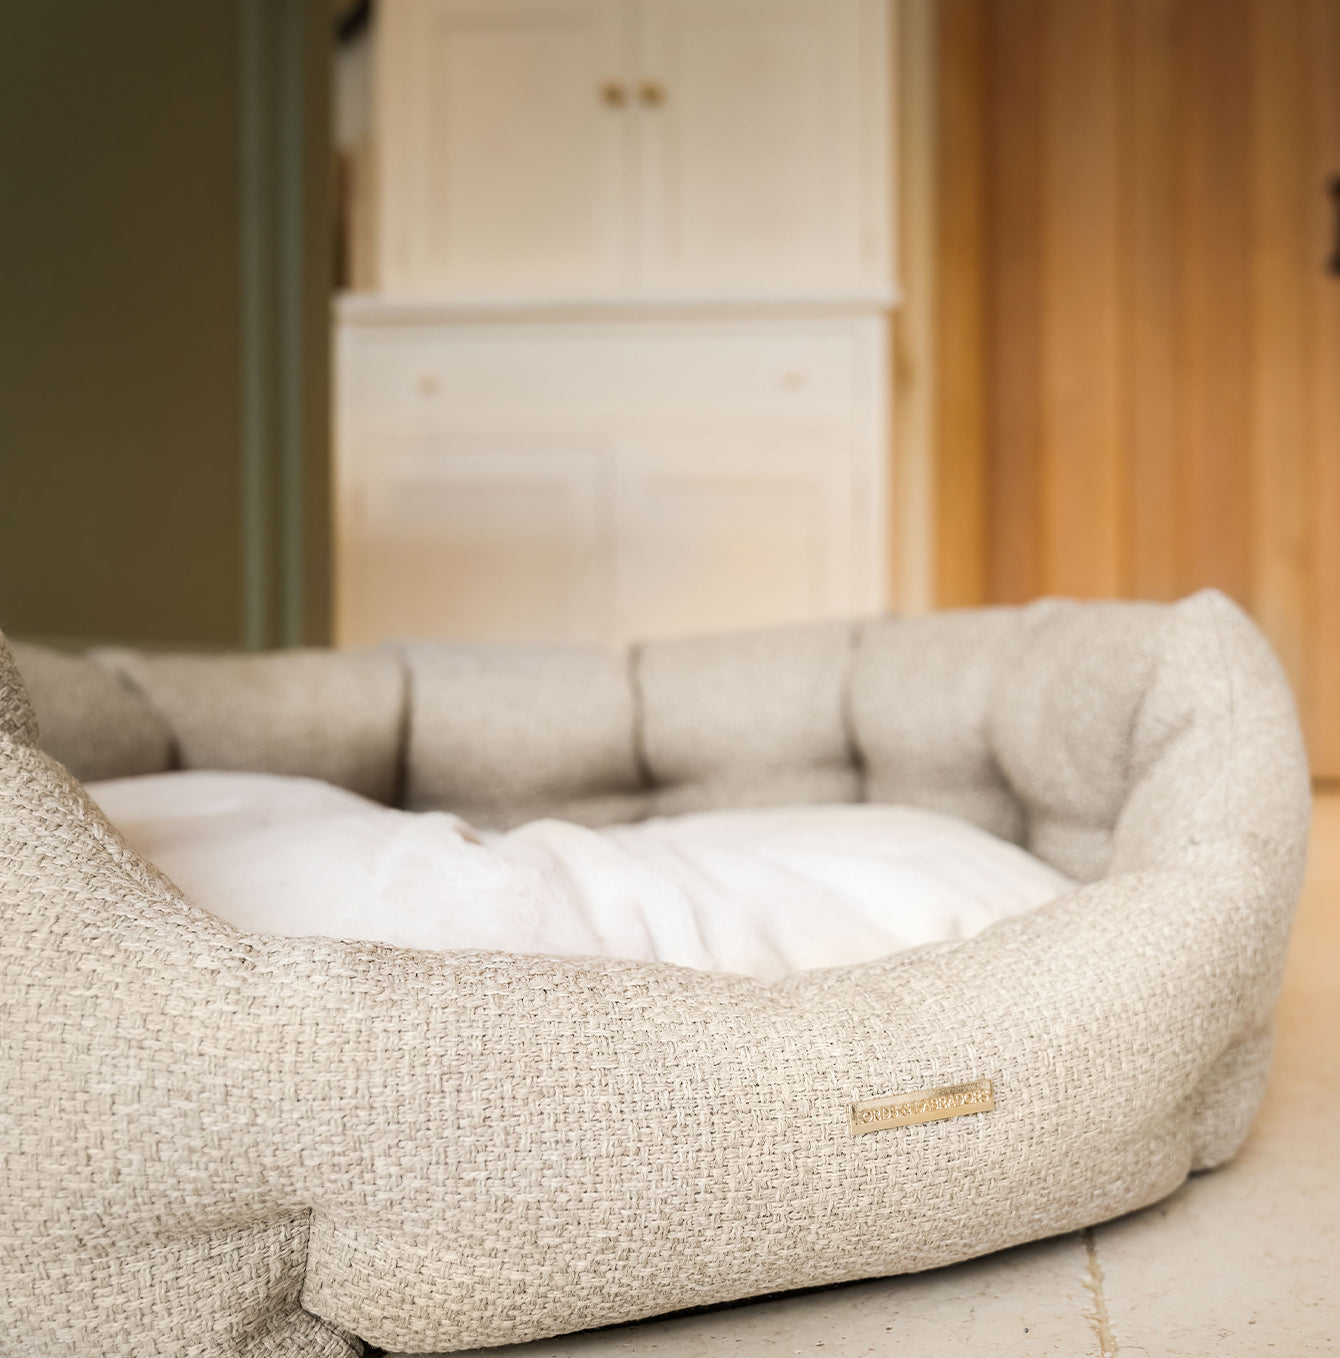 Discover our luxury Herdwick oval dog bed in beautiful sandstone, the ideal choice for dogs to enjoy blissful nap-time, featuring reversible inner cushion with raised sides for dogs who love to rest their head for the ultimate cosiness! Handcrafted in Italy for pure pet luxury! Available now at Lords & Labradors    